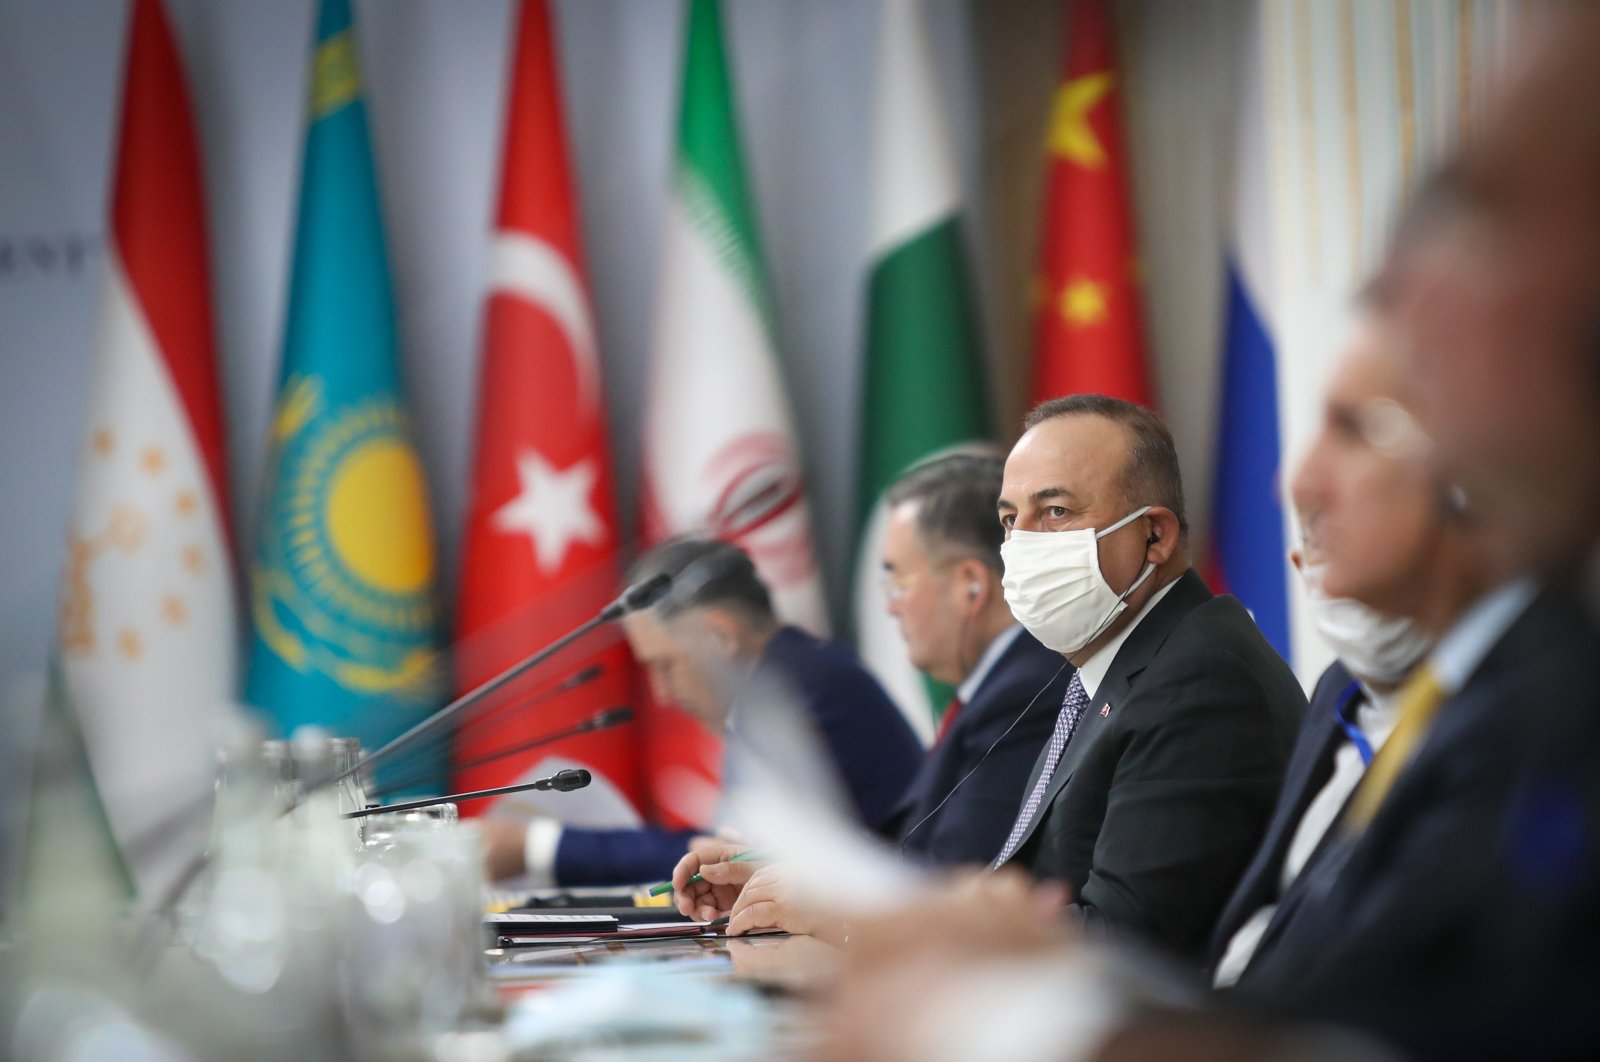 Turkish Foreign Minister Mevlüt Çavuşoğlu attends the 9th Ministerial Meeting of the Heart of Asia-Istanbul Process, Dushanbe, Tajikistan, March 30, 2021. (AA)